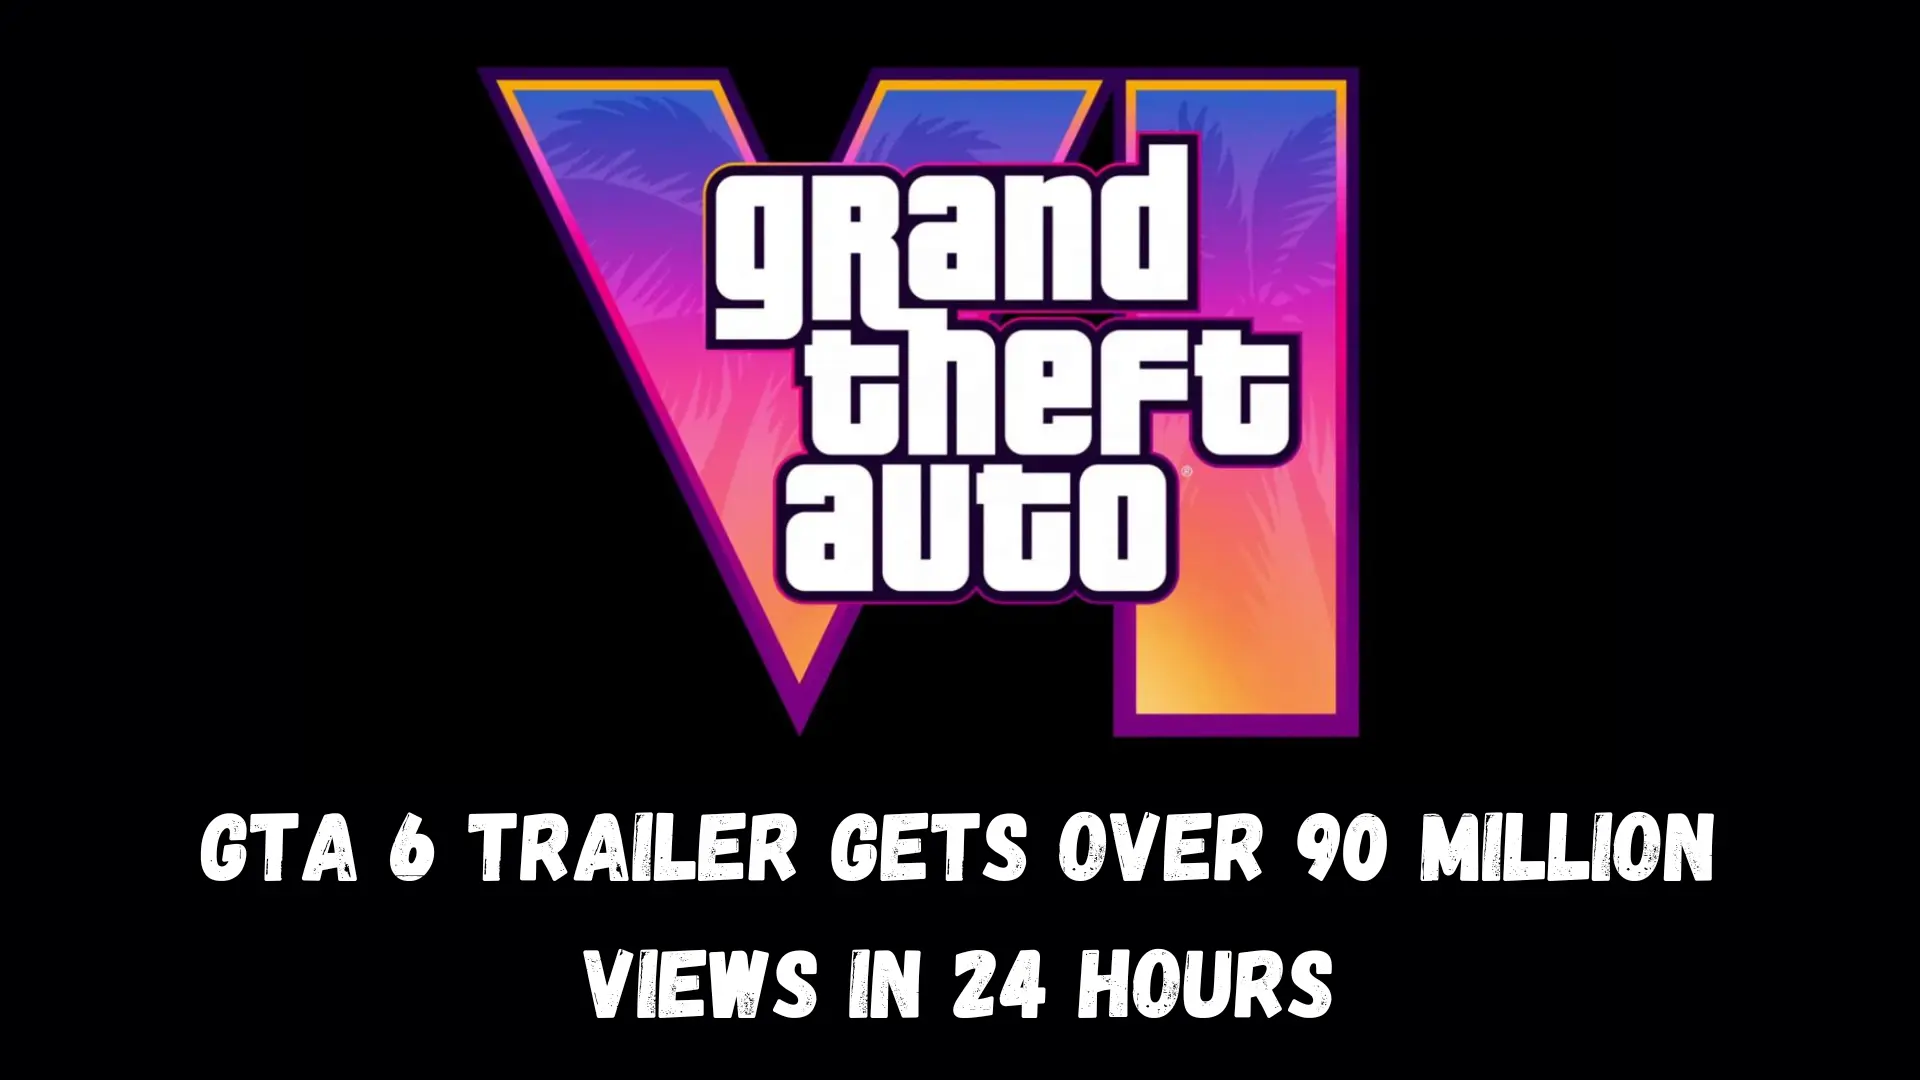 The GTA 6 Trailer Gets Over 90 Million Views in 24 Hours